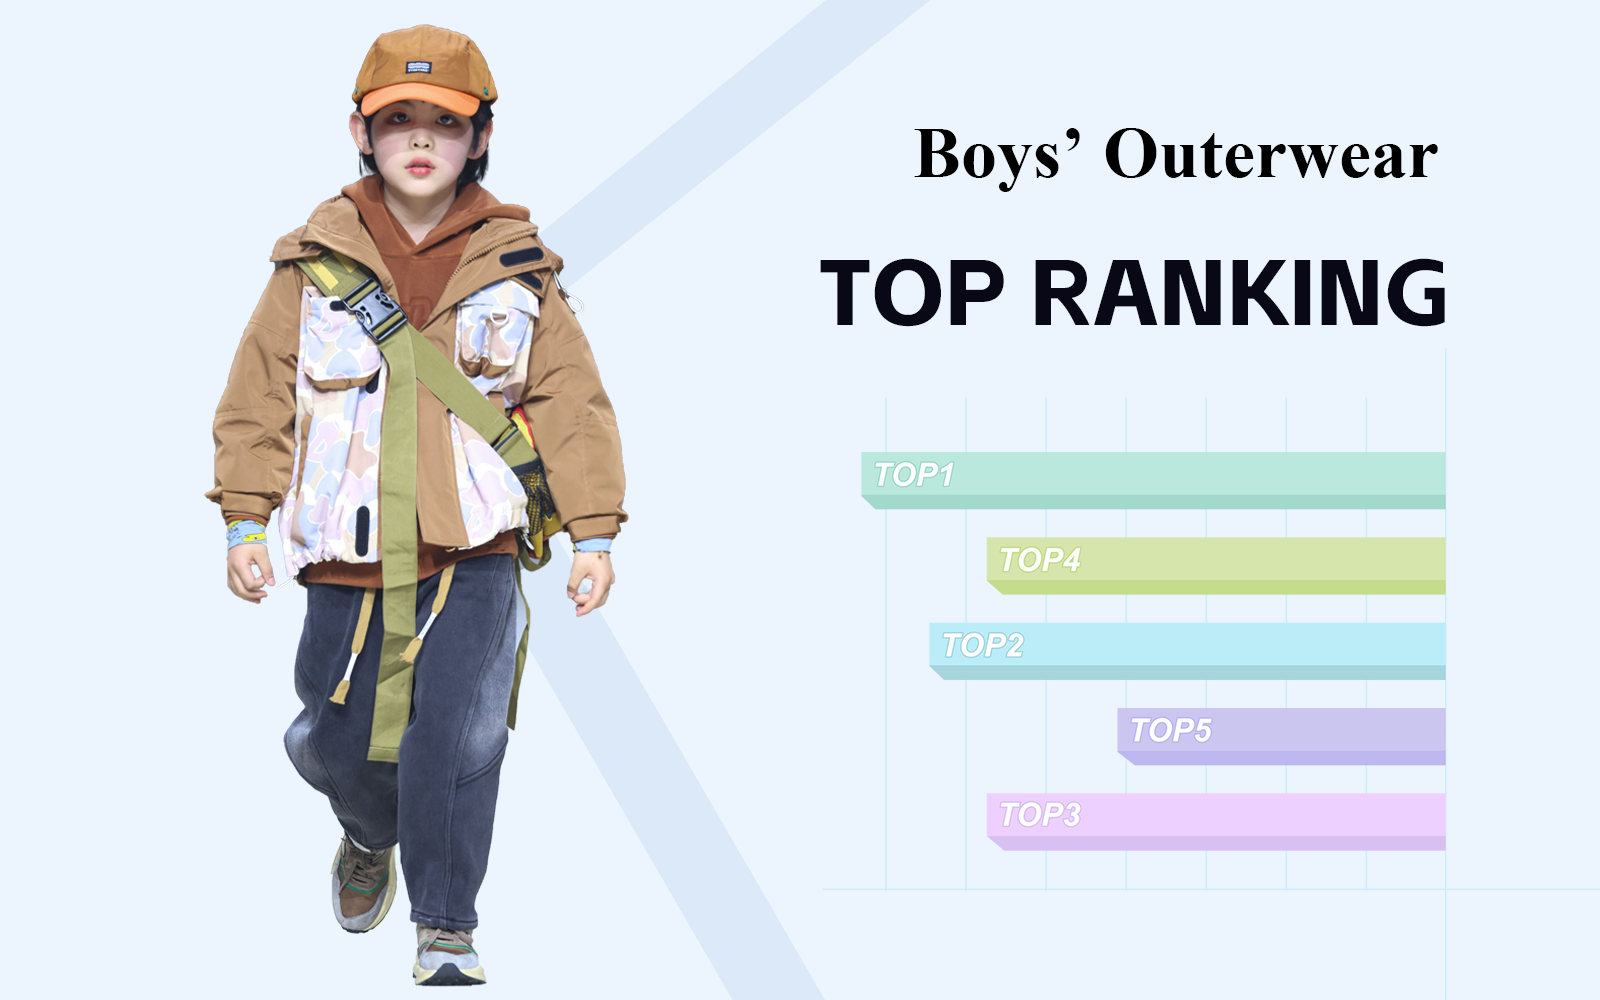 The TOP Ranking of Boys' Outerwear